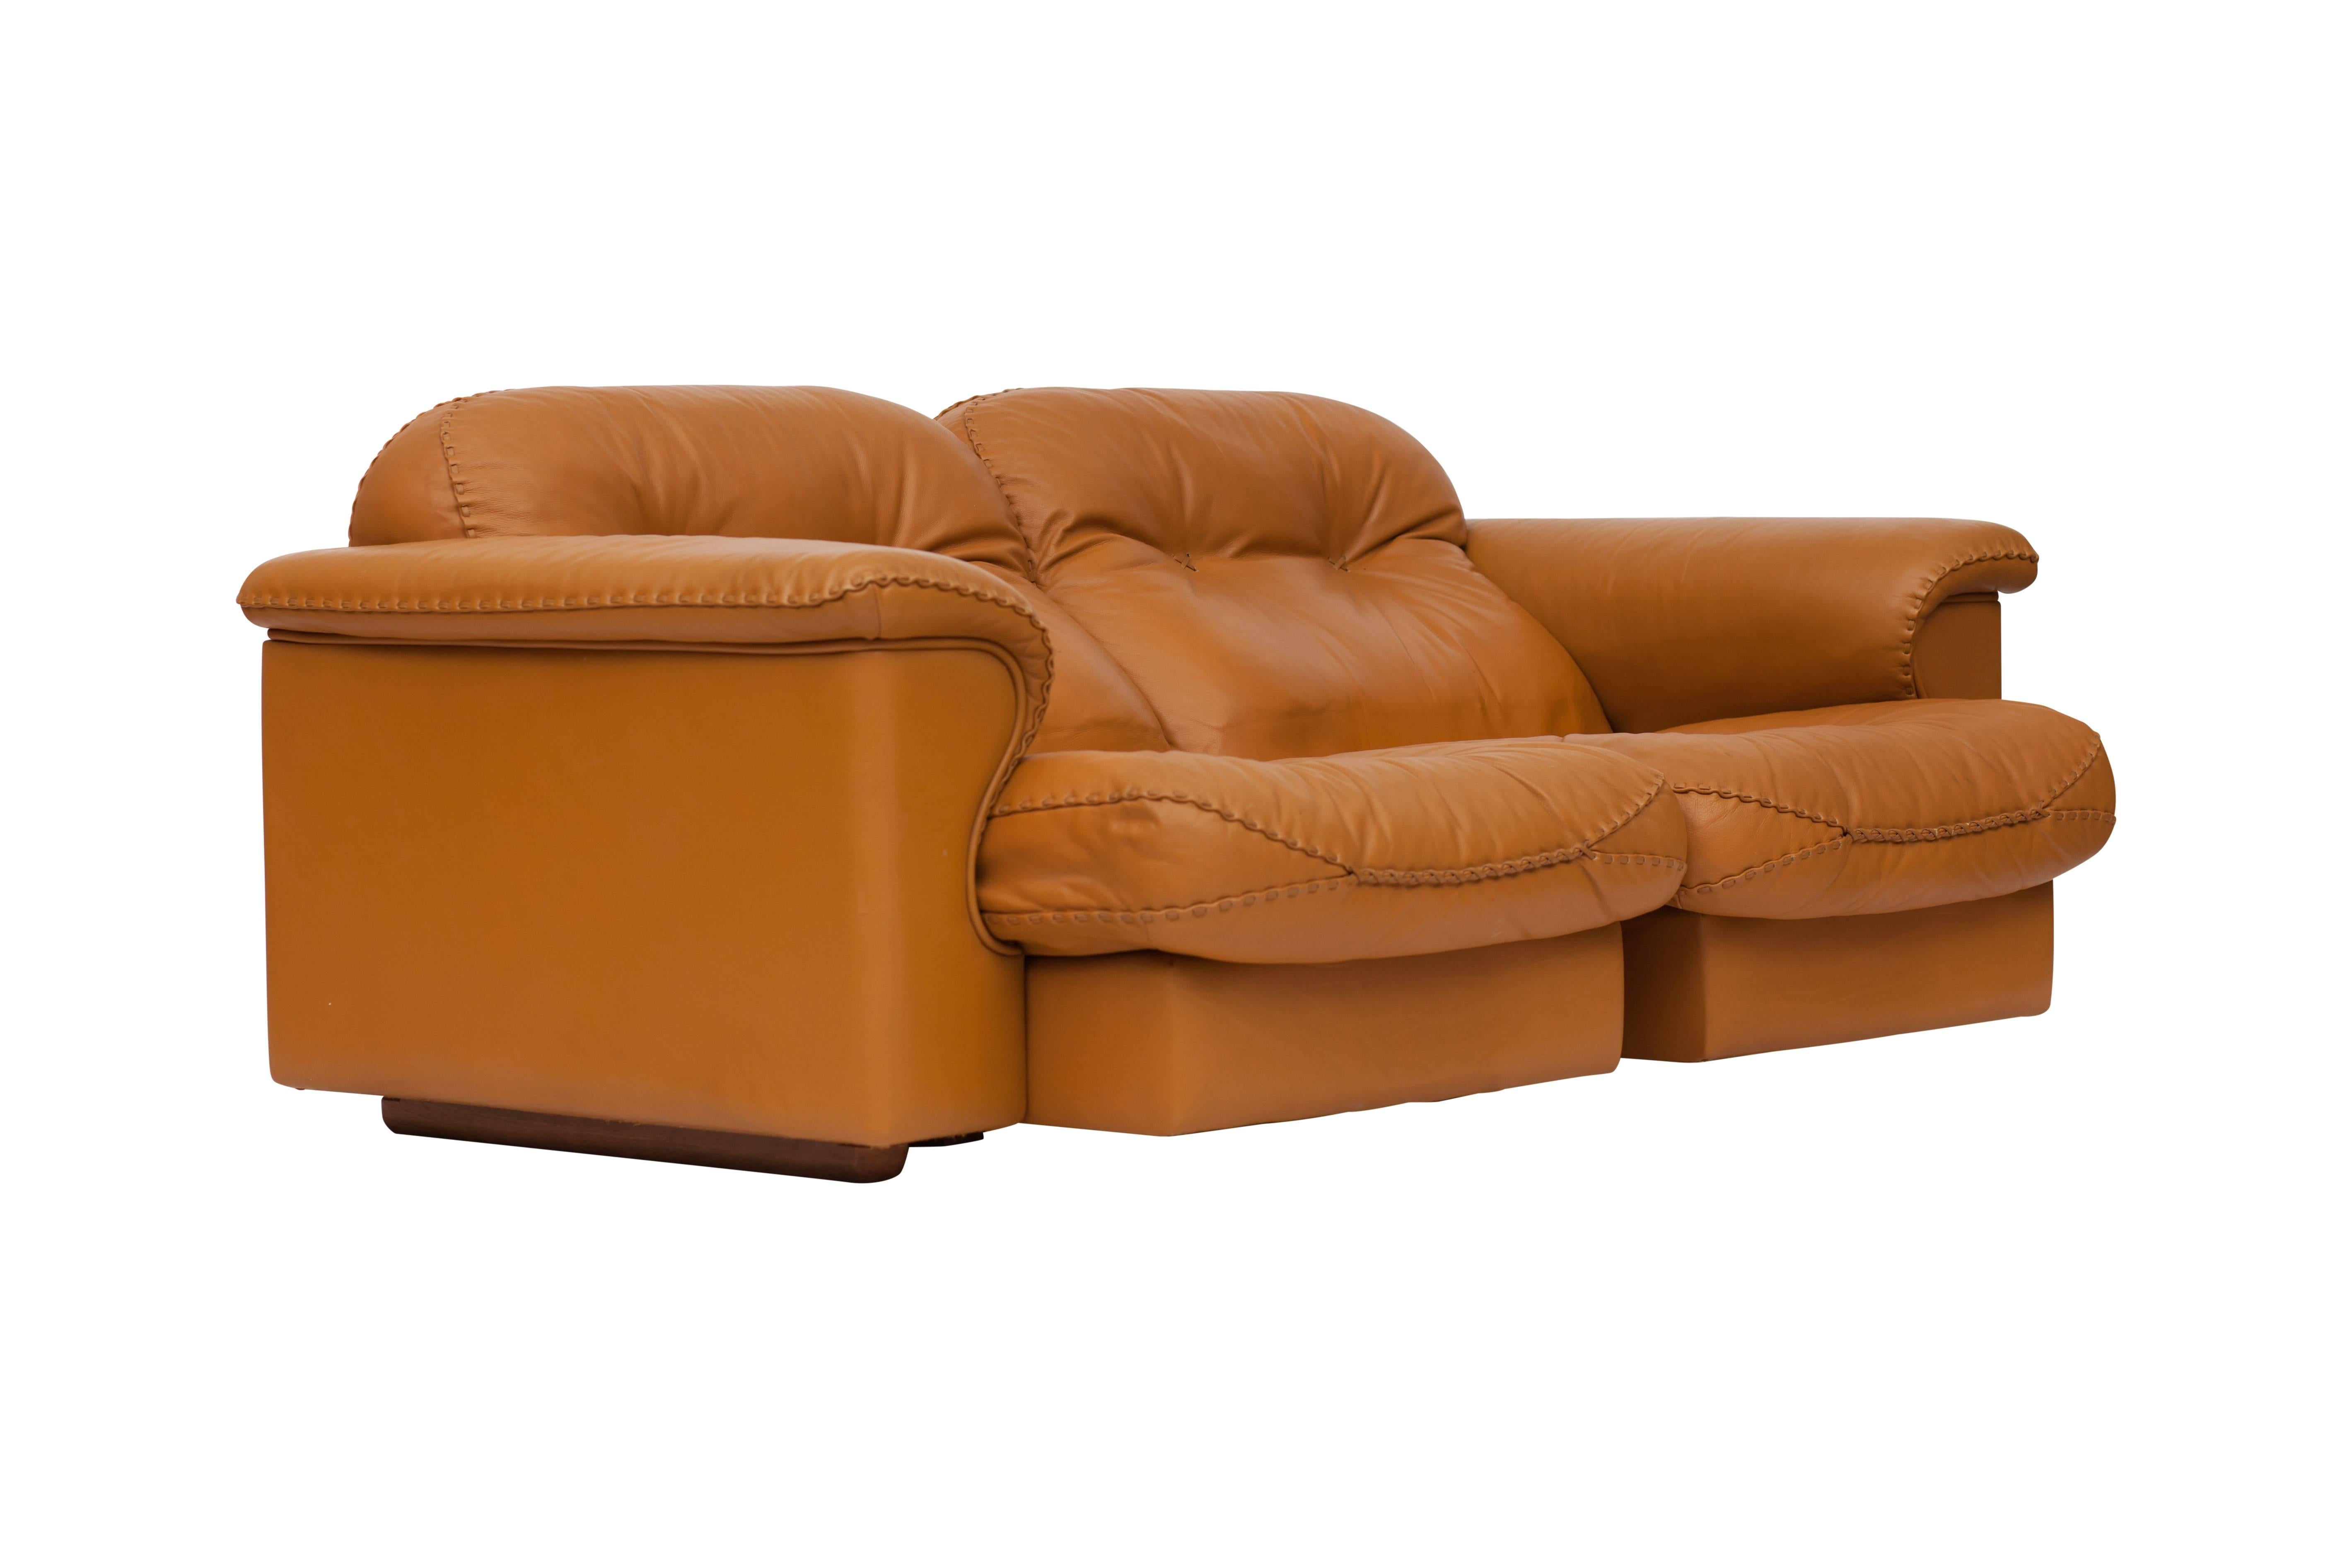 Mid-Century Modern Adjustable and comfortable two-seat sofa by De Sede.
The sofa is provide with a high quality brown leather and interesting think stitched seams.
The sofa features in a James Bond movie.


   